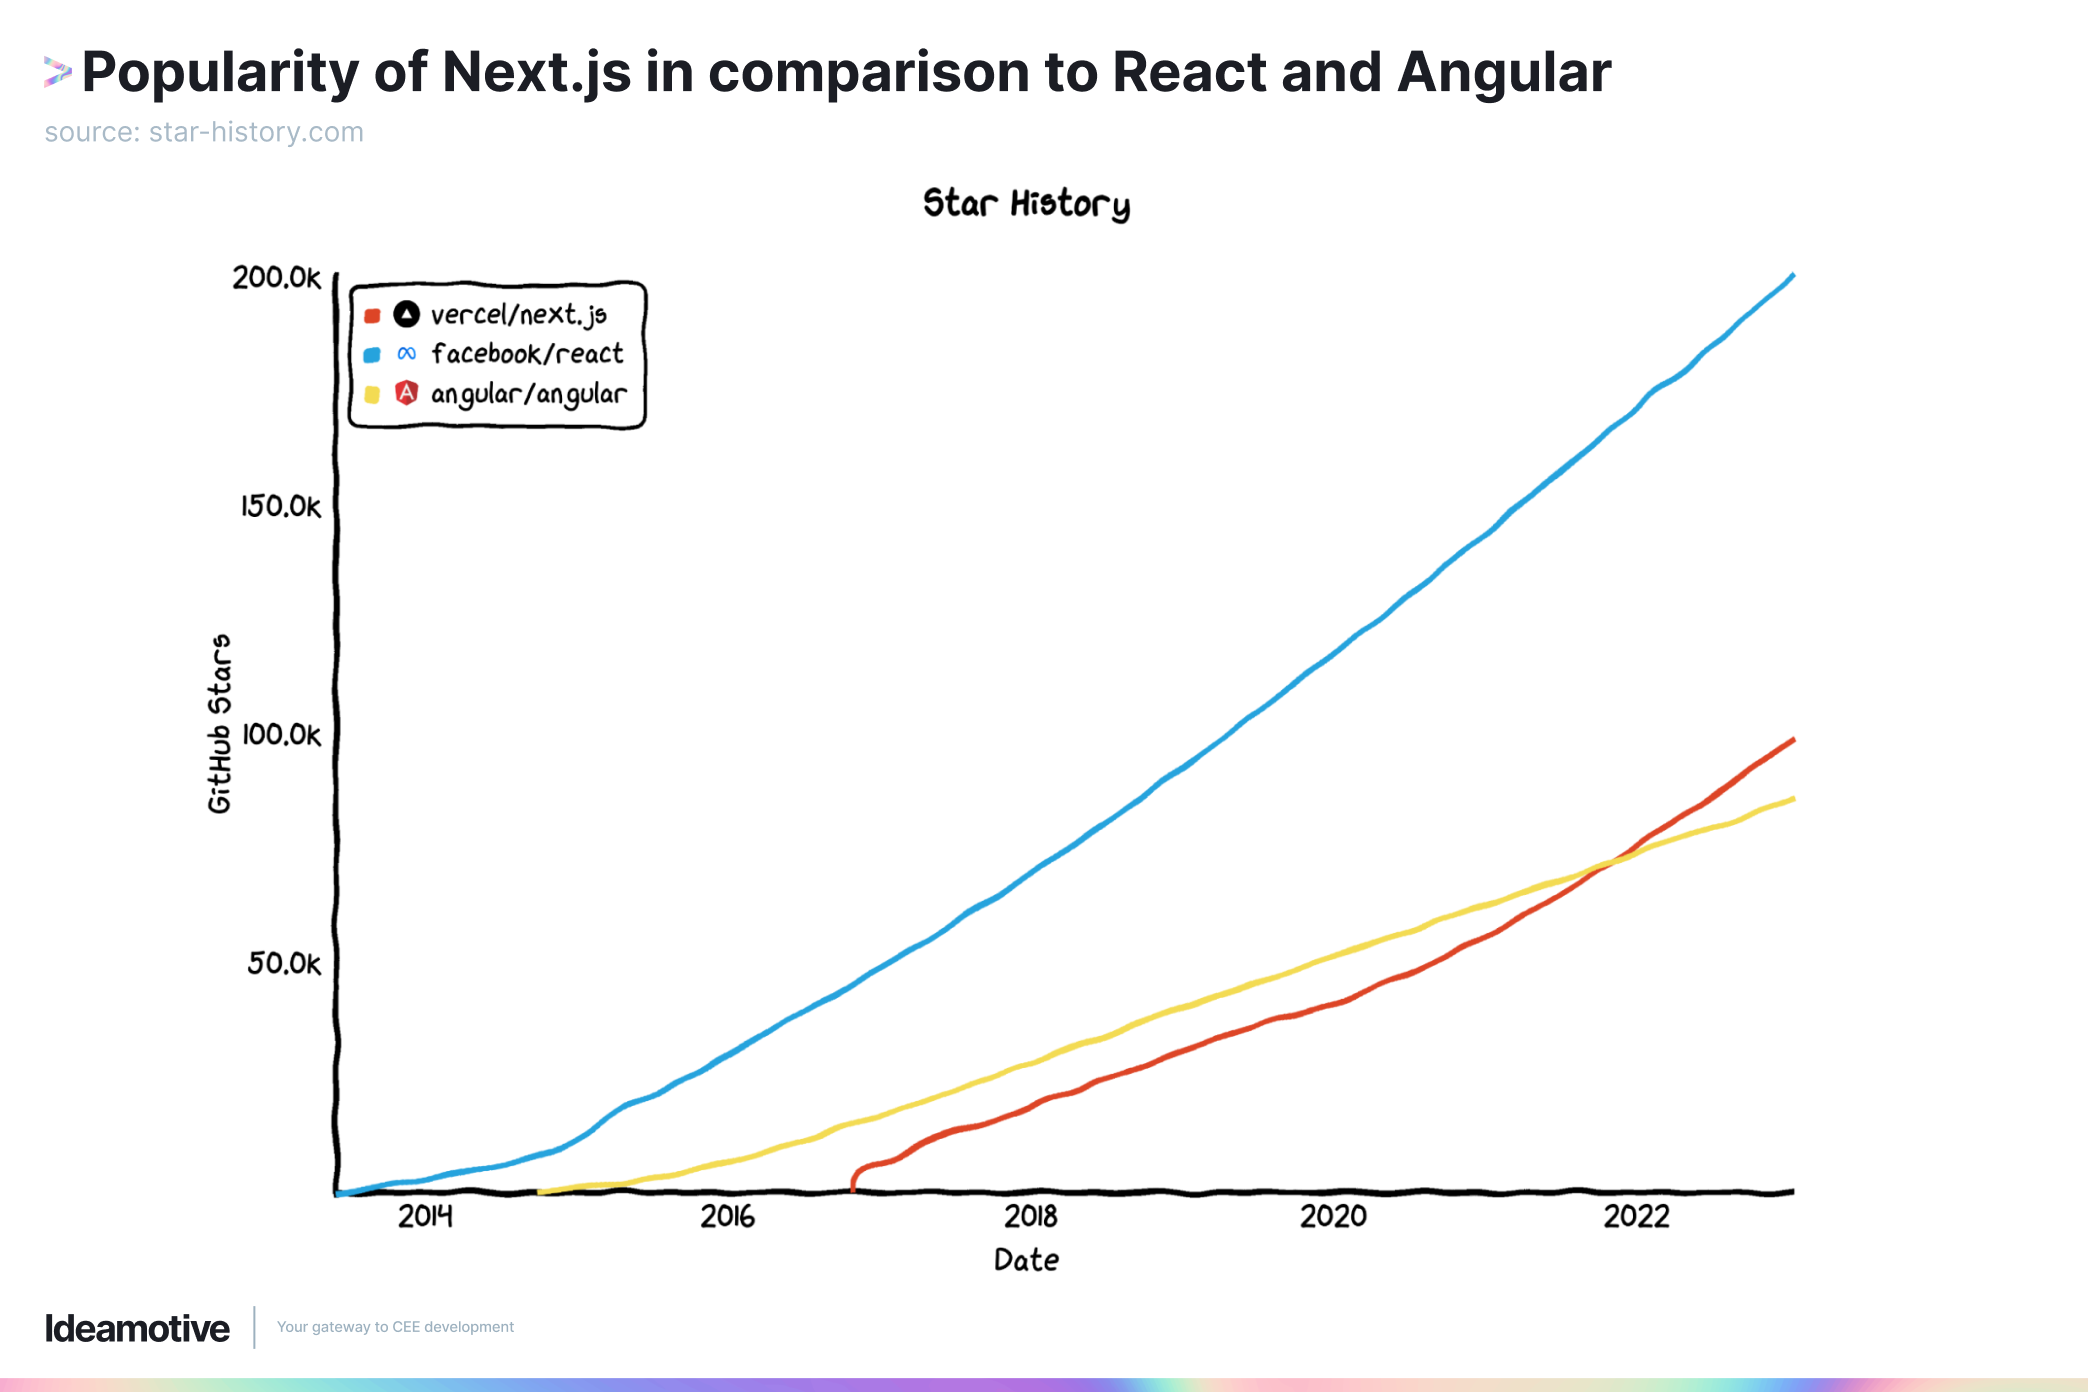 Popularity of Next.js in comparison to React and Angular